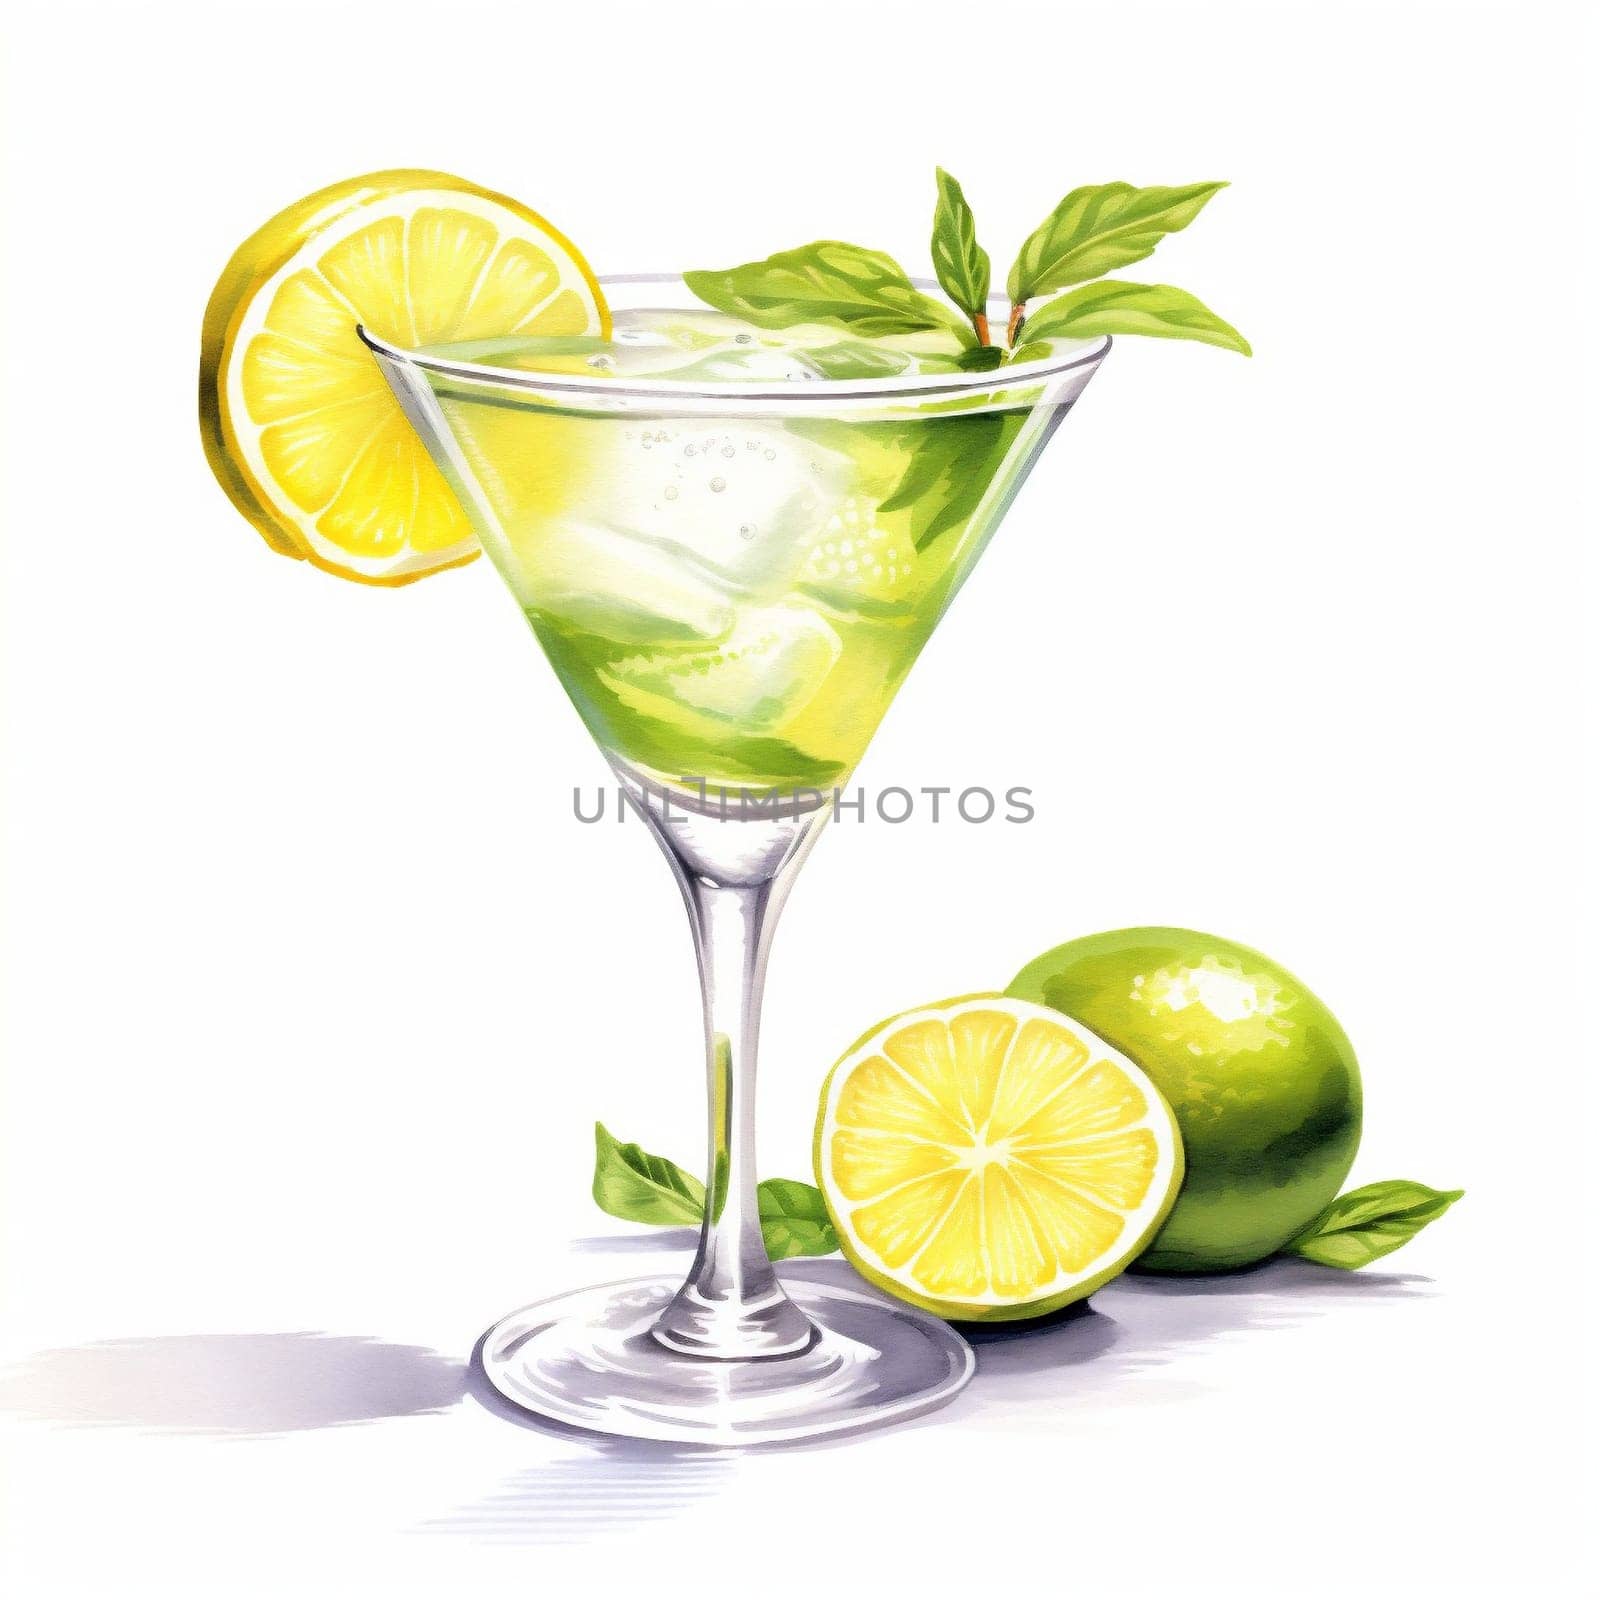 Cocktail Day with Lemon, Ice, and Mint Leaves. by Rina_Dozornaya